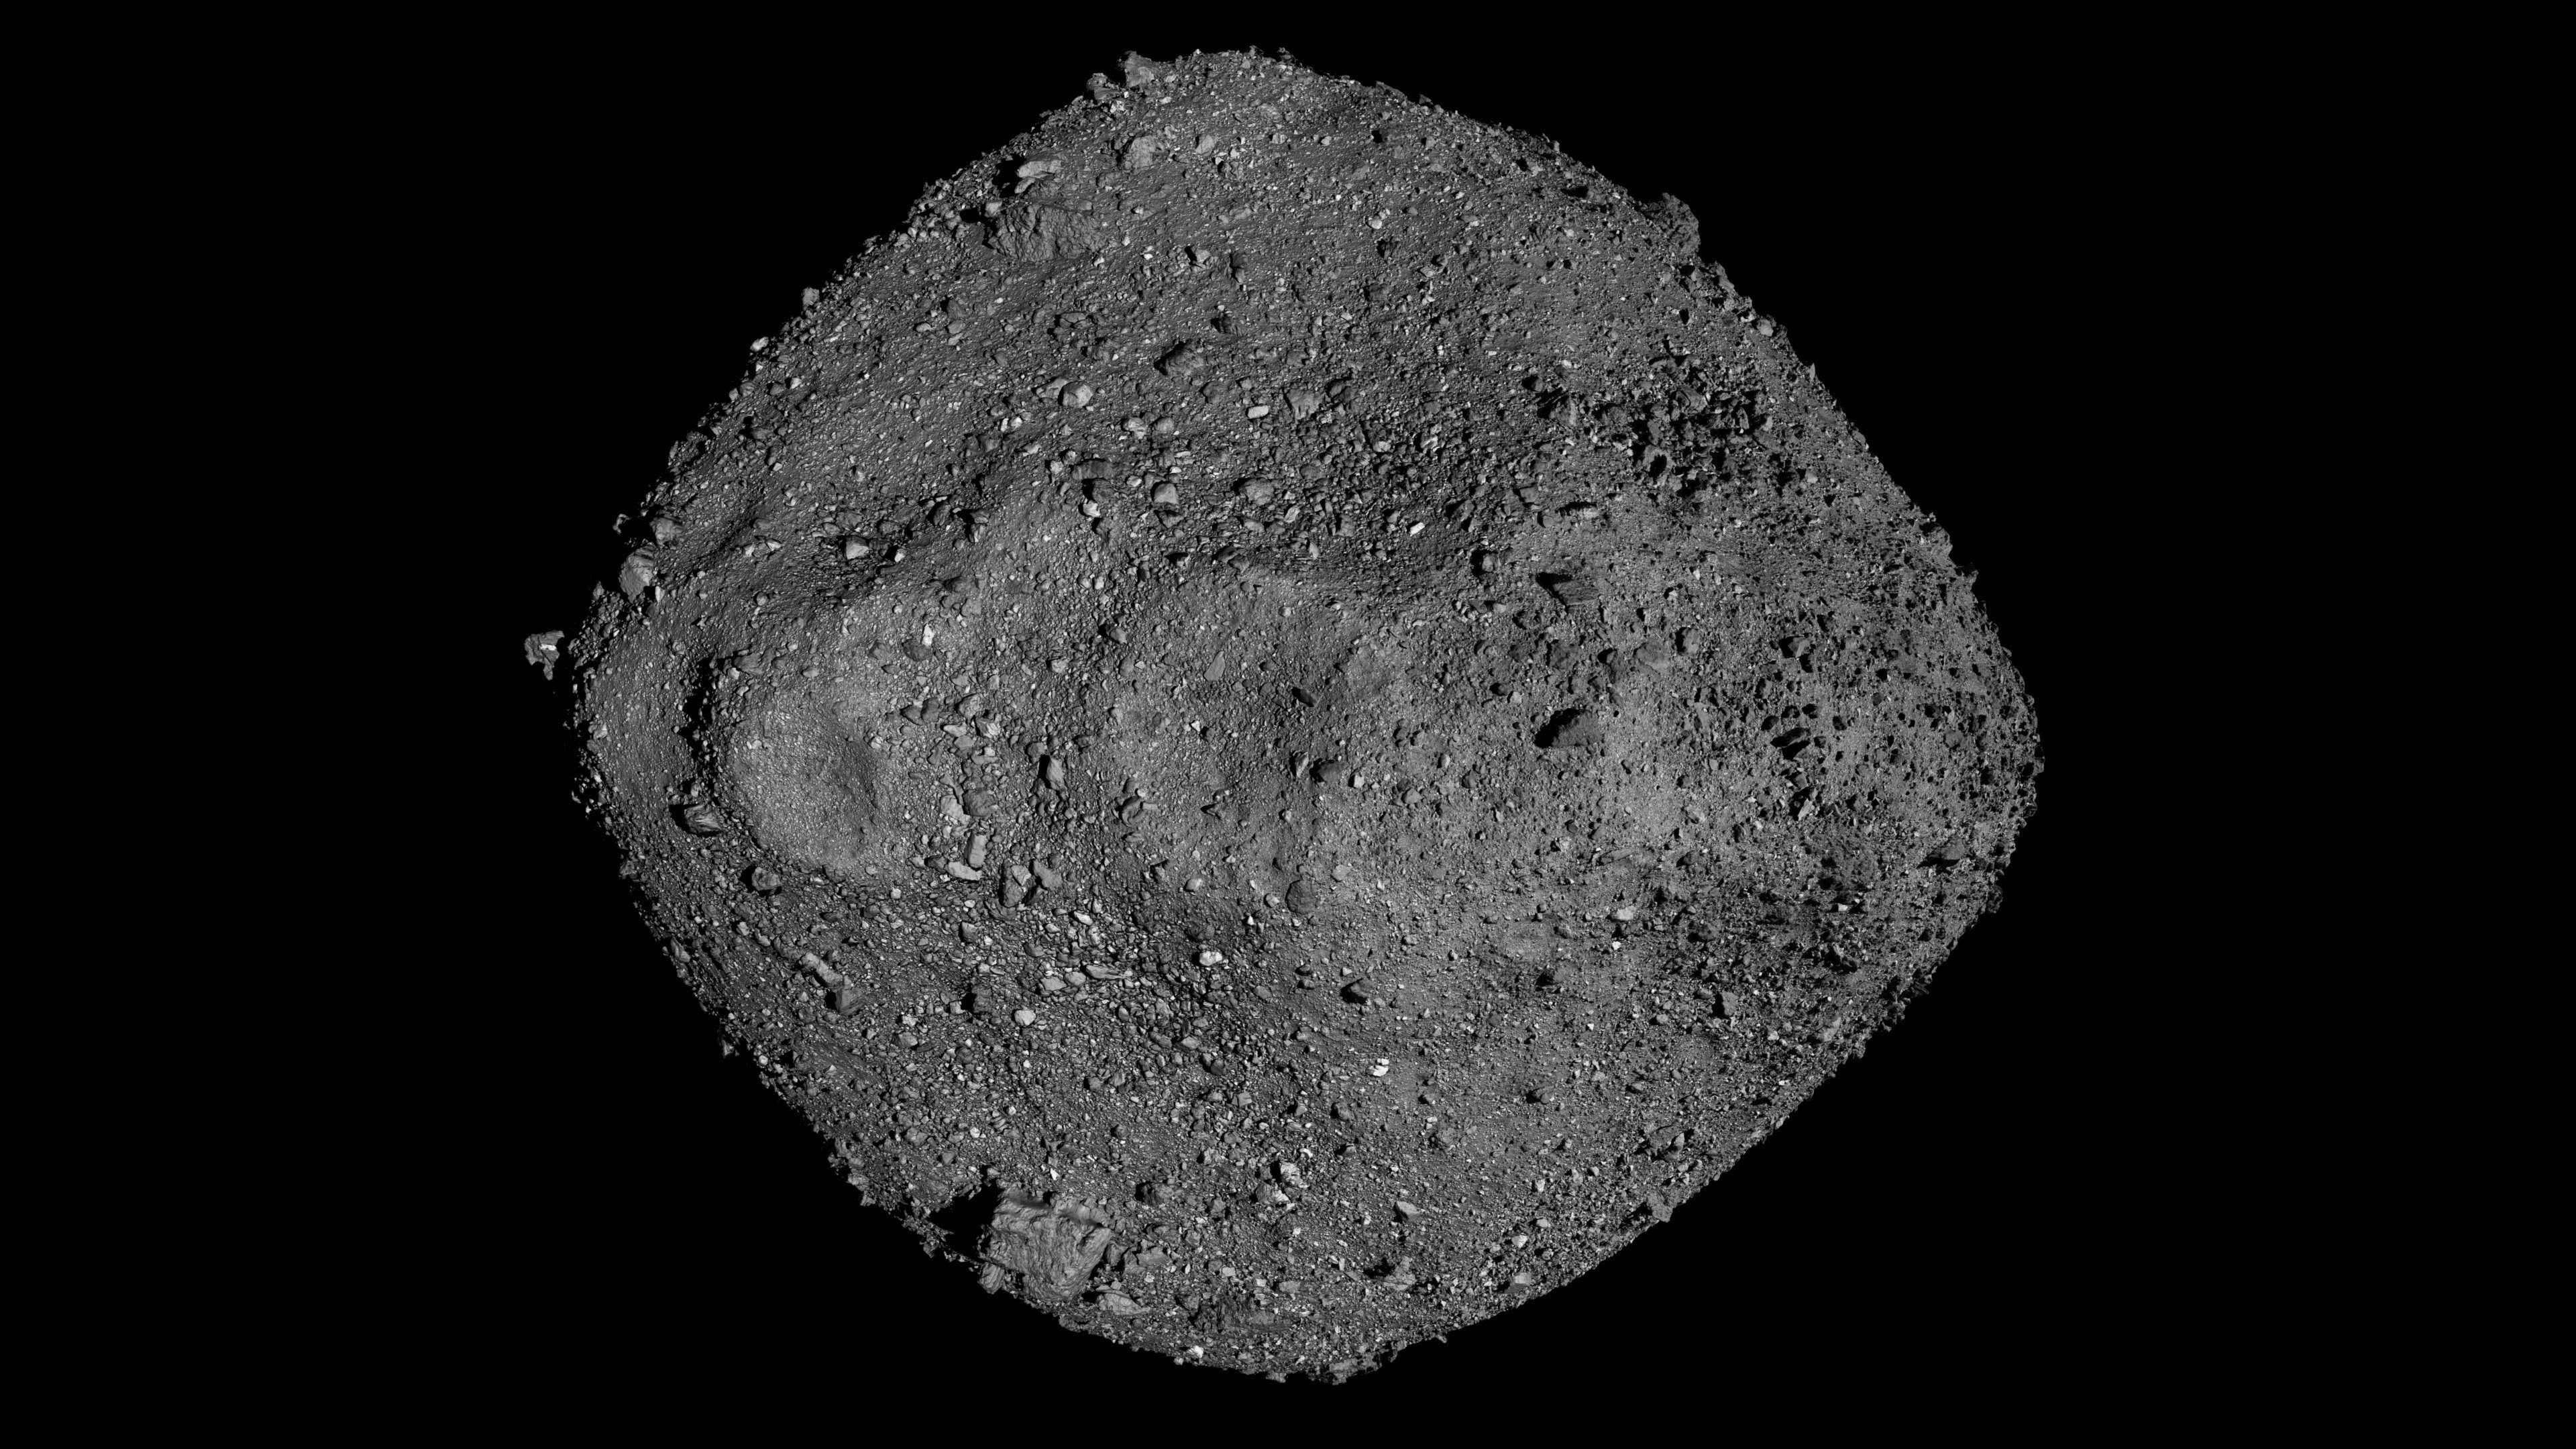 This mosaic of Bennu was created using observations made by NASA's OSIRIS-REx spacecraft that was in close proximity to the asteroid for over two years.